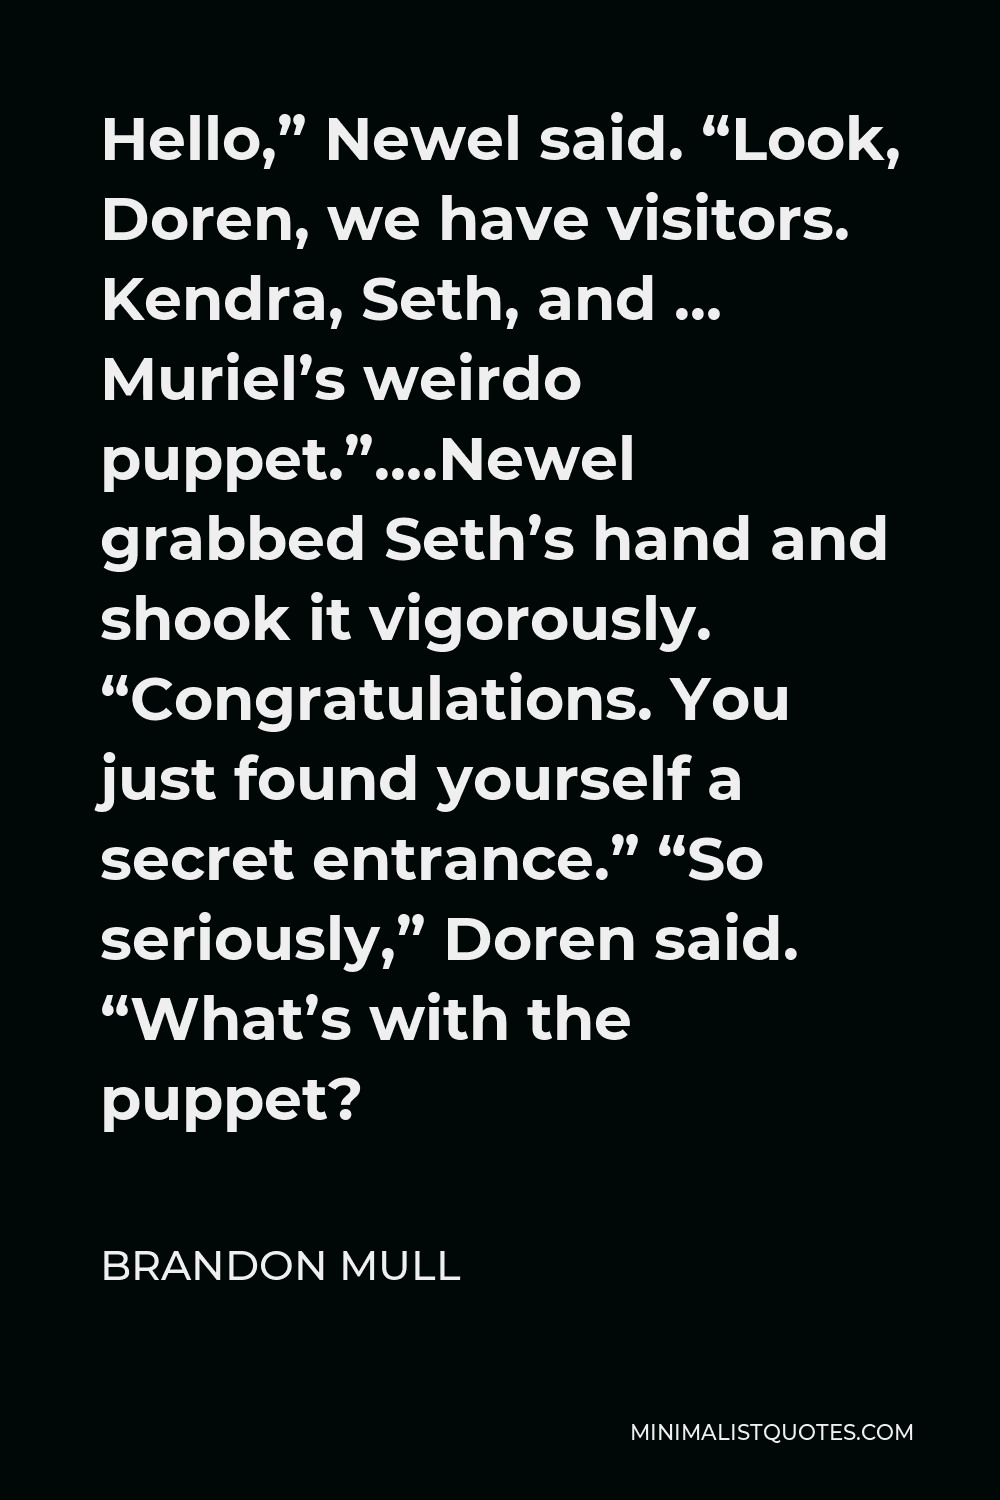 Brandon Mull Quote - Hello,” Newel said. “Look, Doren, we have visitors. Kendra, Seth, and … Muriel’s weirdo puppet.”….Newel grabbed Seth’s hand and shook it vigorously. “Congratulations. You just found yourself a secret entrance.” “So seriously,” Doren said. “What’s with the puppet?